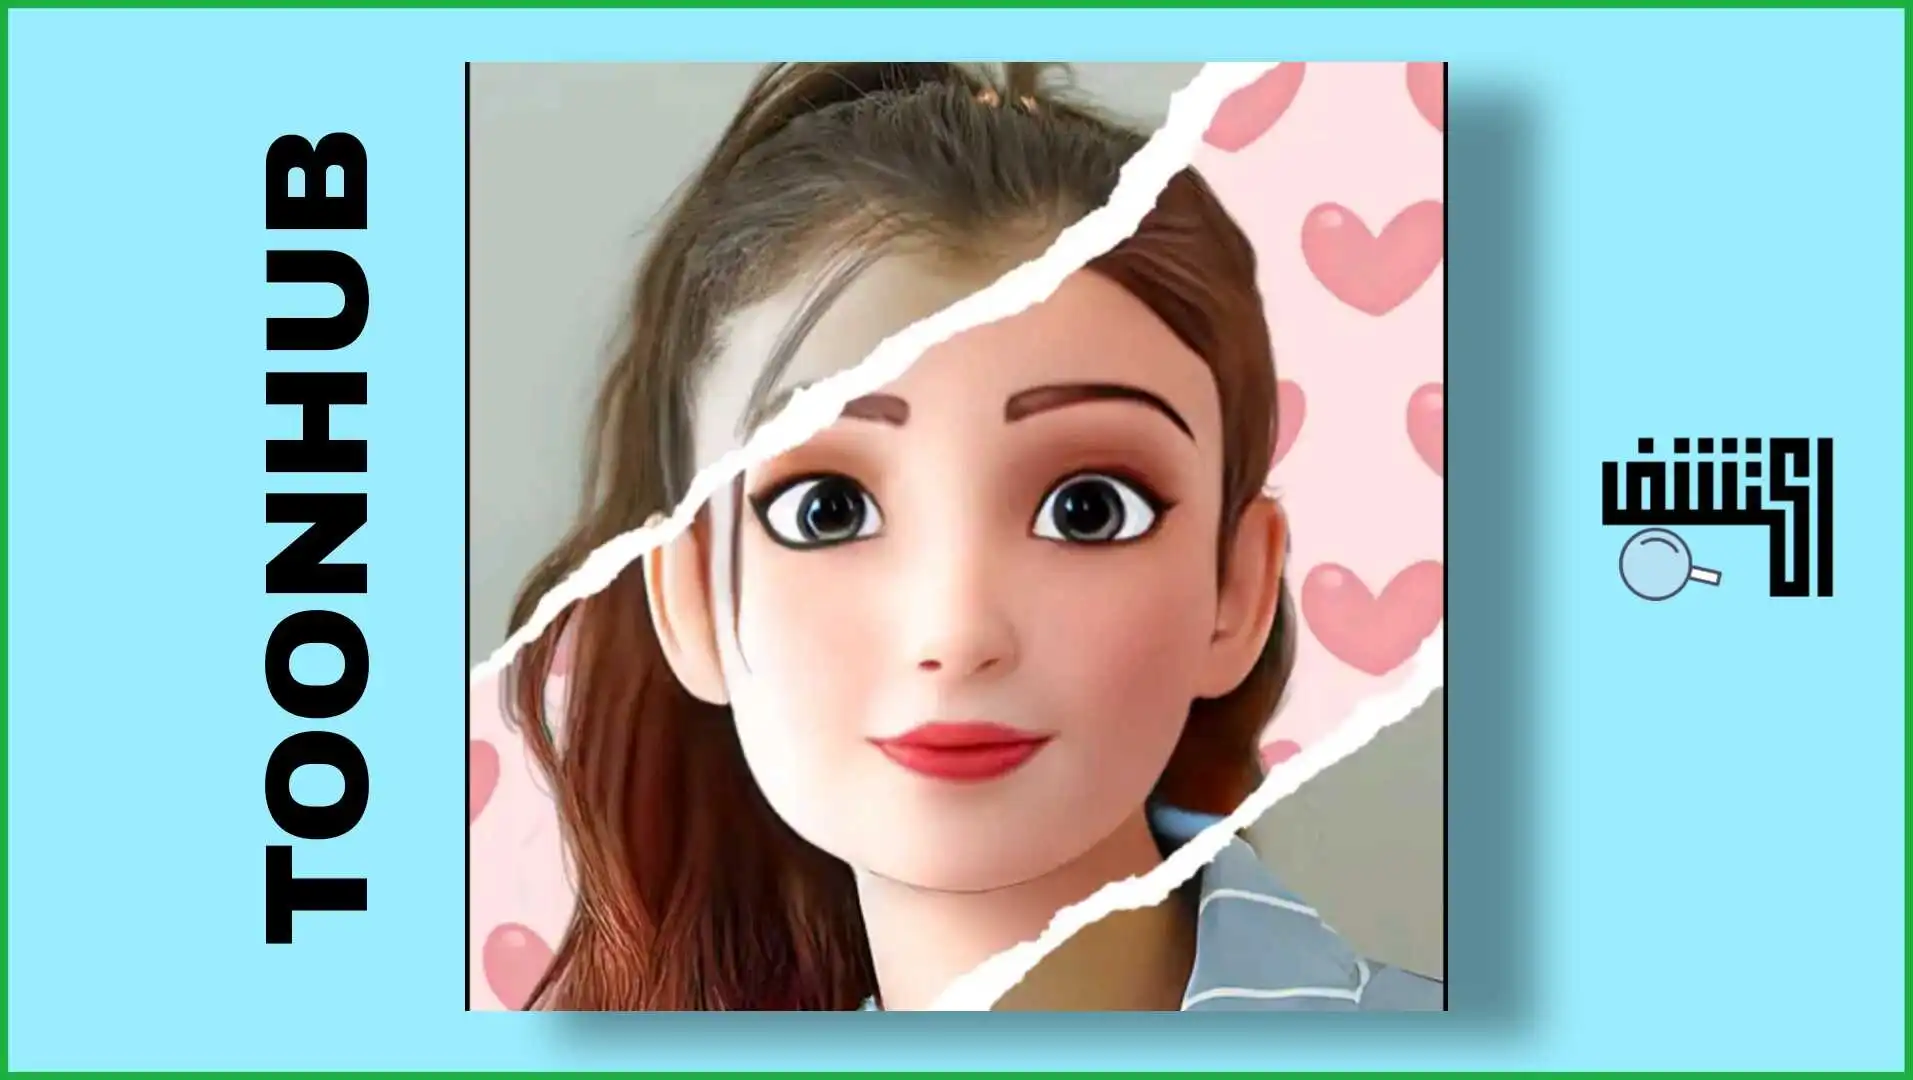 TOONHUB Is An App to Edit Photos And Turn Photos Into Cartoons With Artificial Intelligence